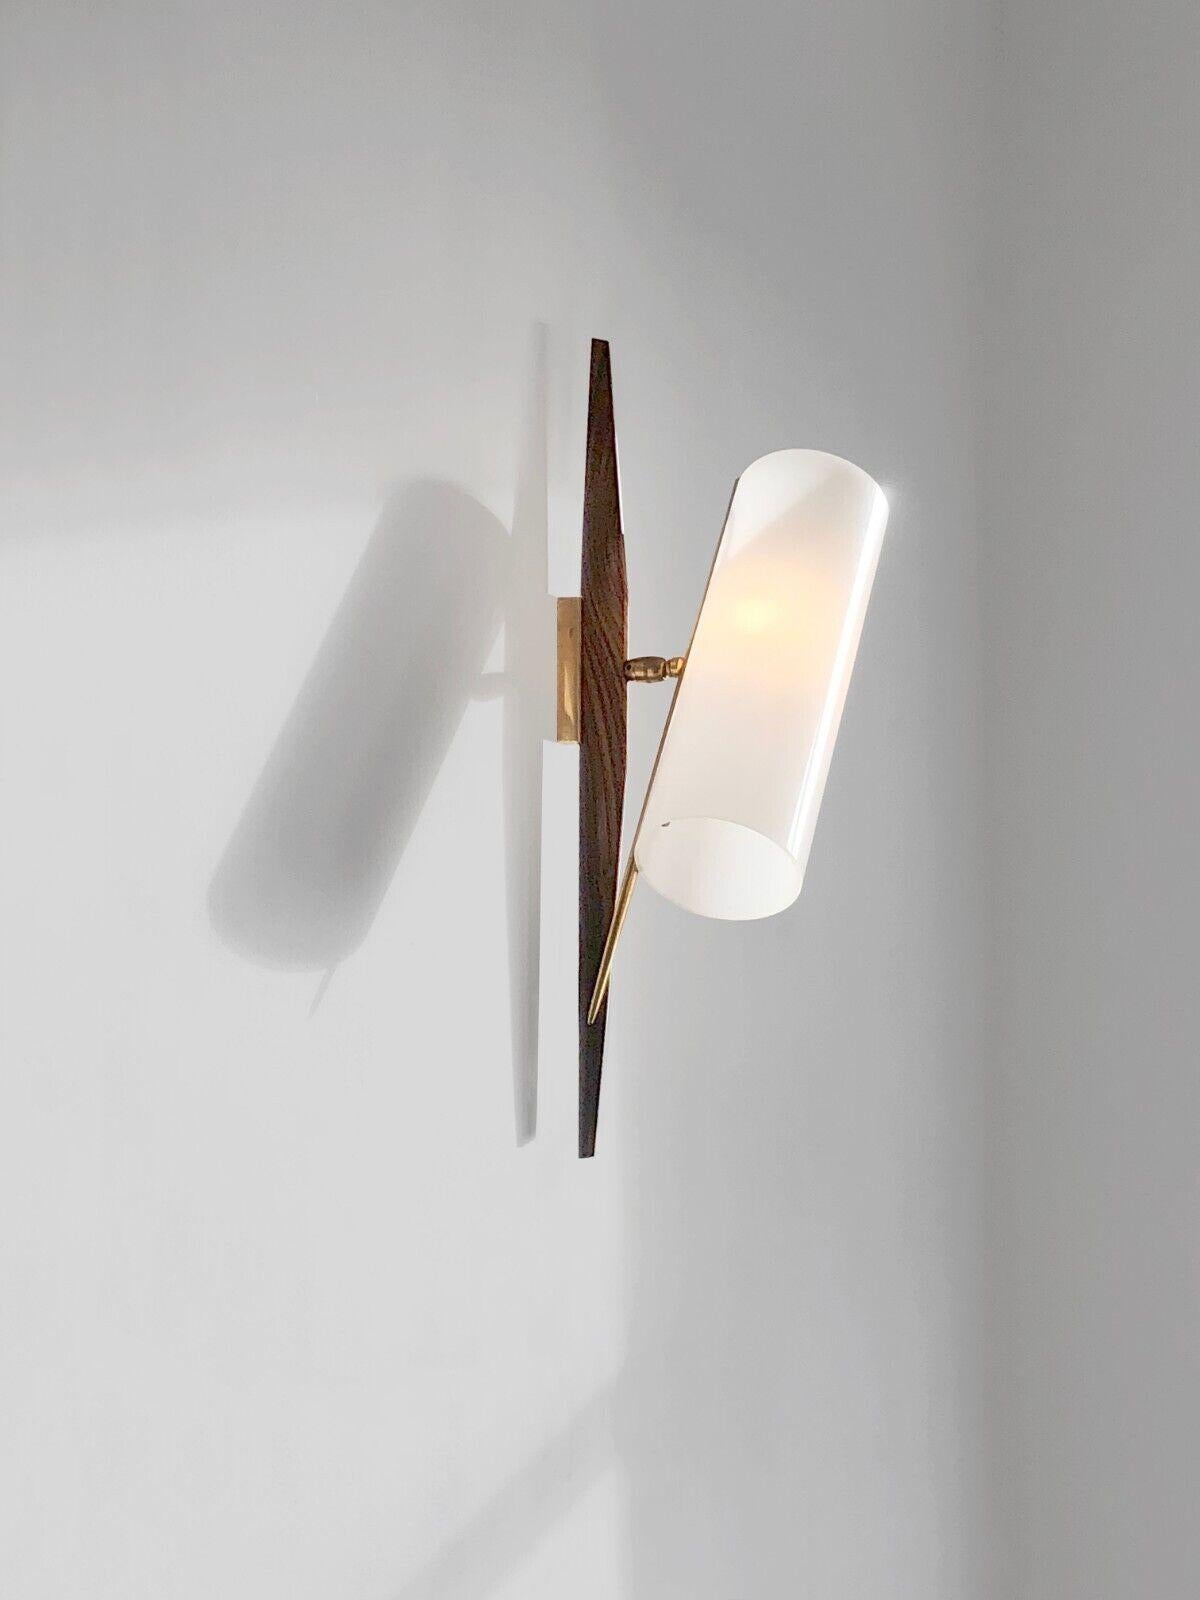 A very beautiful large adjustable wall light, Modernist, Fifties, Forme-Libre, large tapered base in solid mahogany with superb veining forming a suspended vertical line, placed on a rectangle of gilded brass, and its beautiful cylindrical lampshade